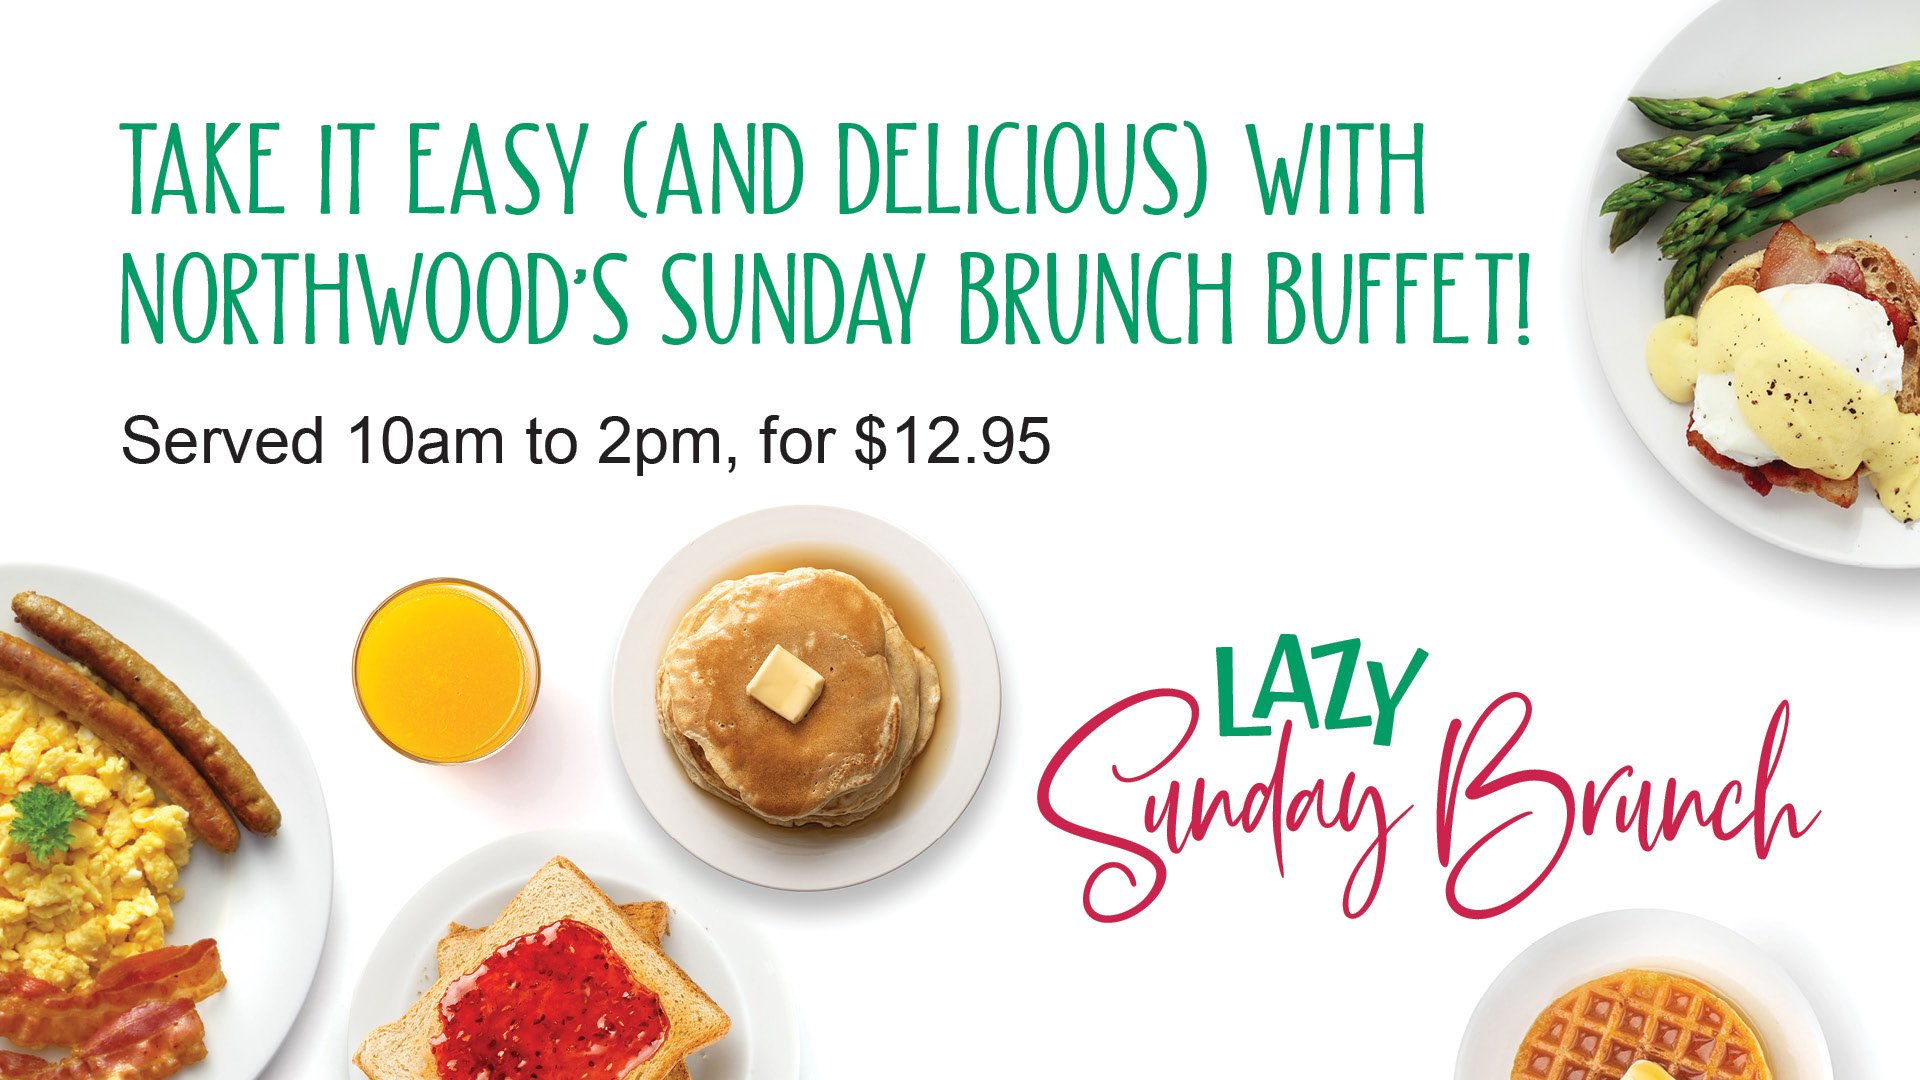 Sunday Brunch buffet for only $12.95